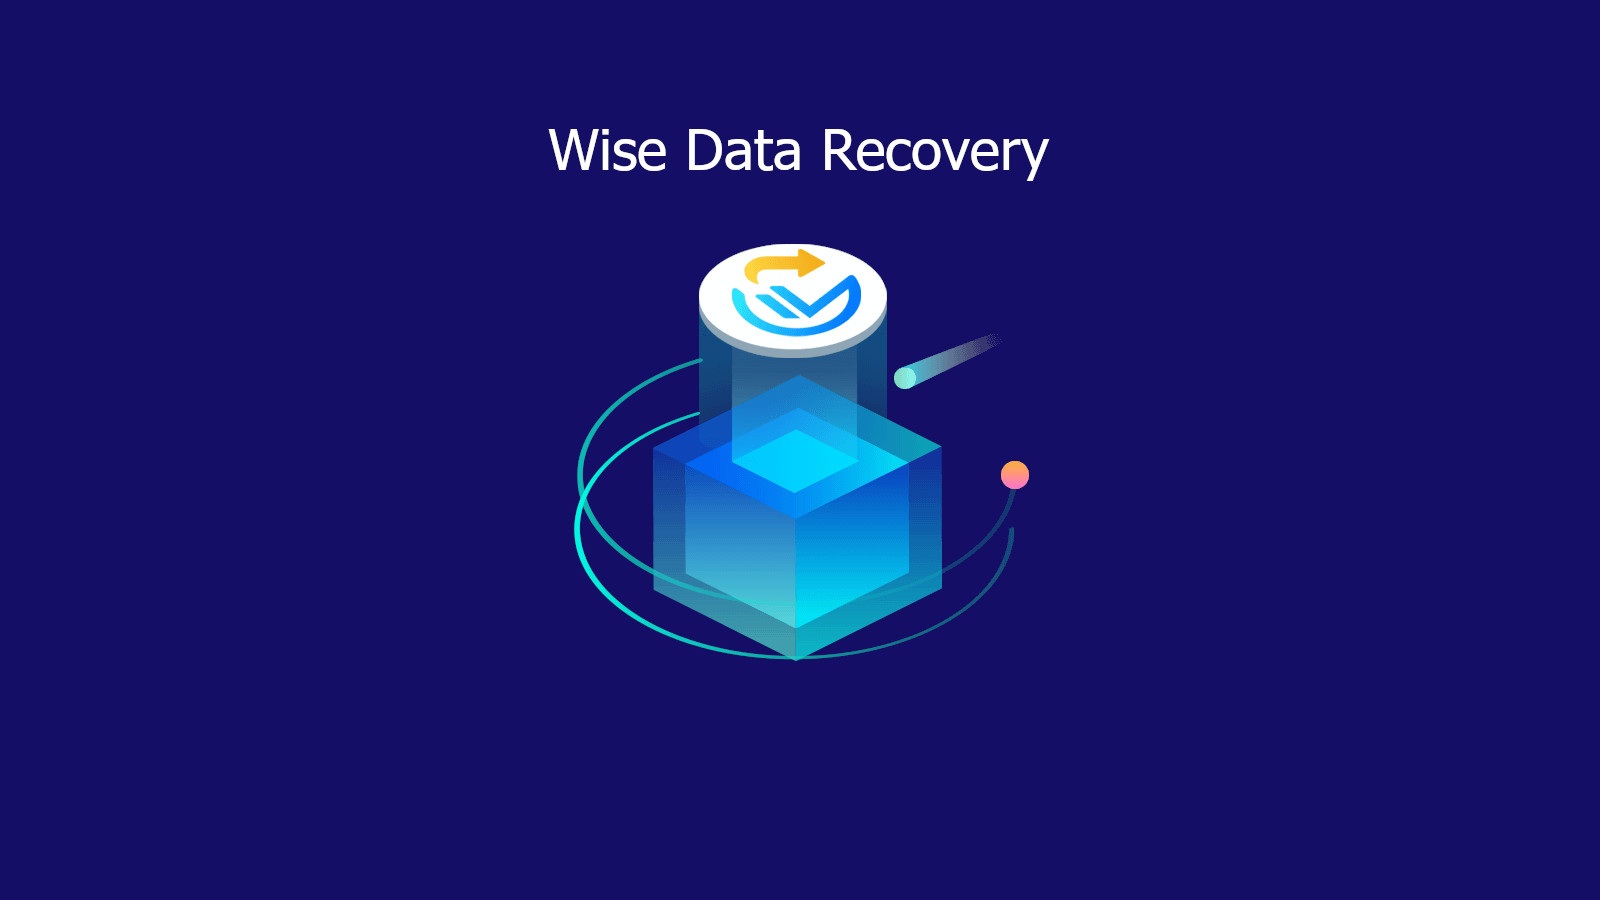 [$ 33.88] Wise Data Recovery PRO CD Key (1 Year / 1 PC)